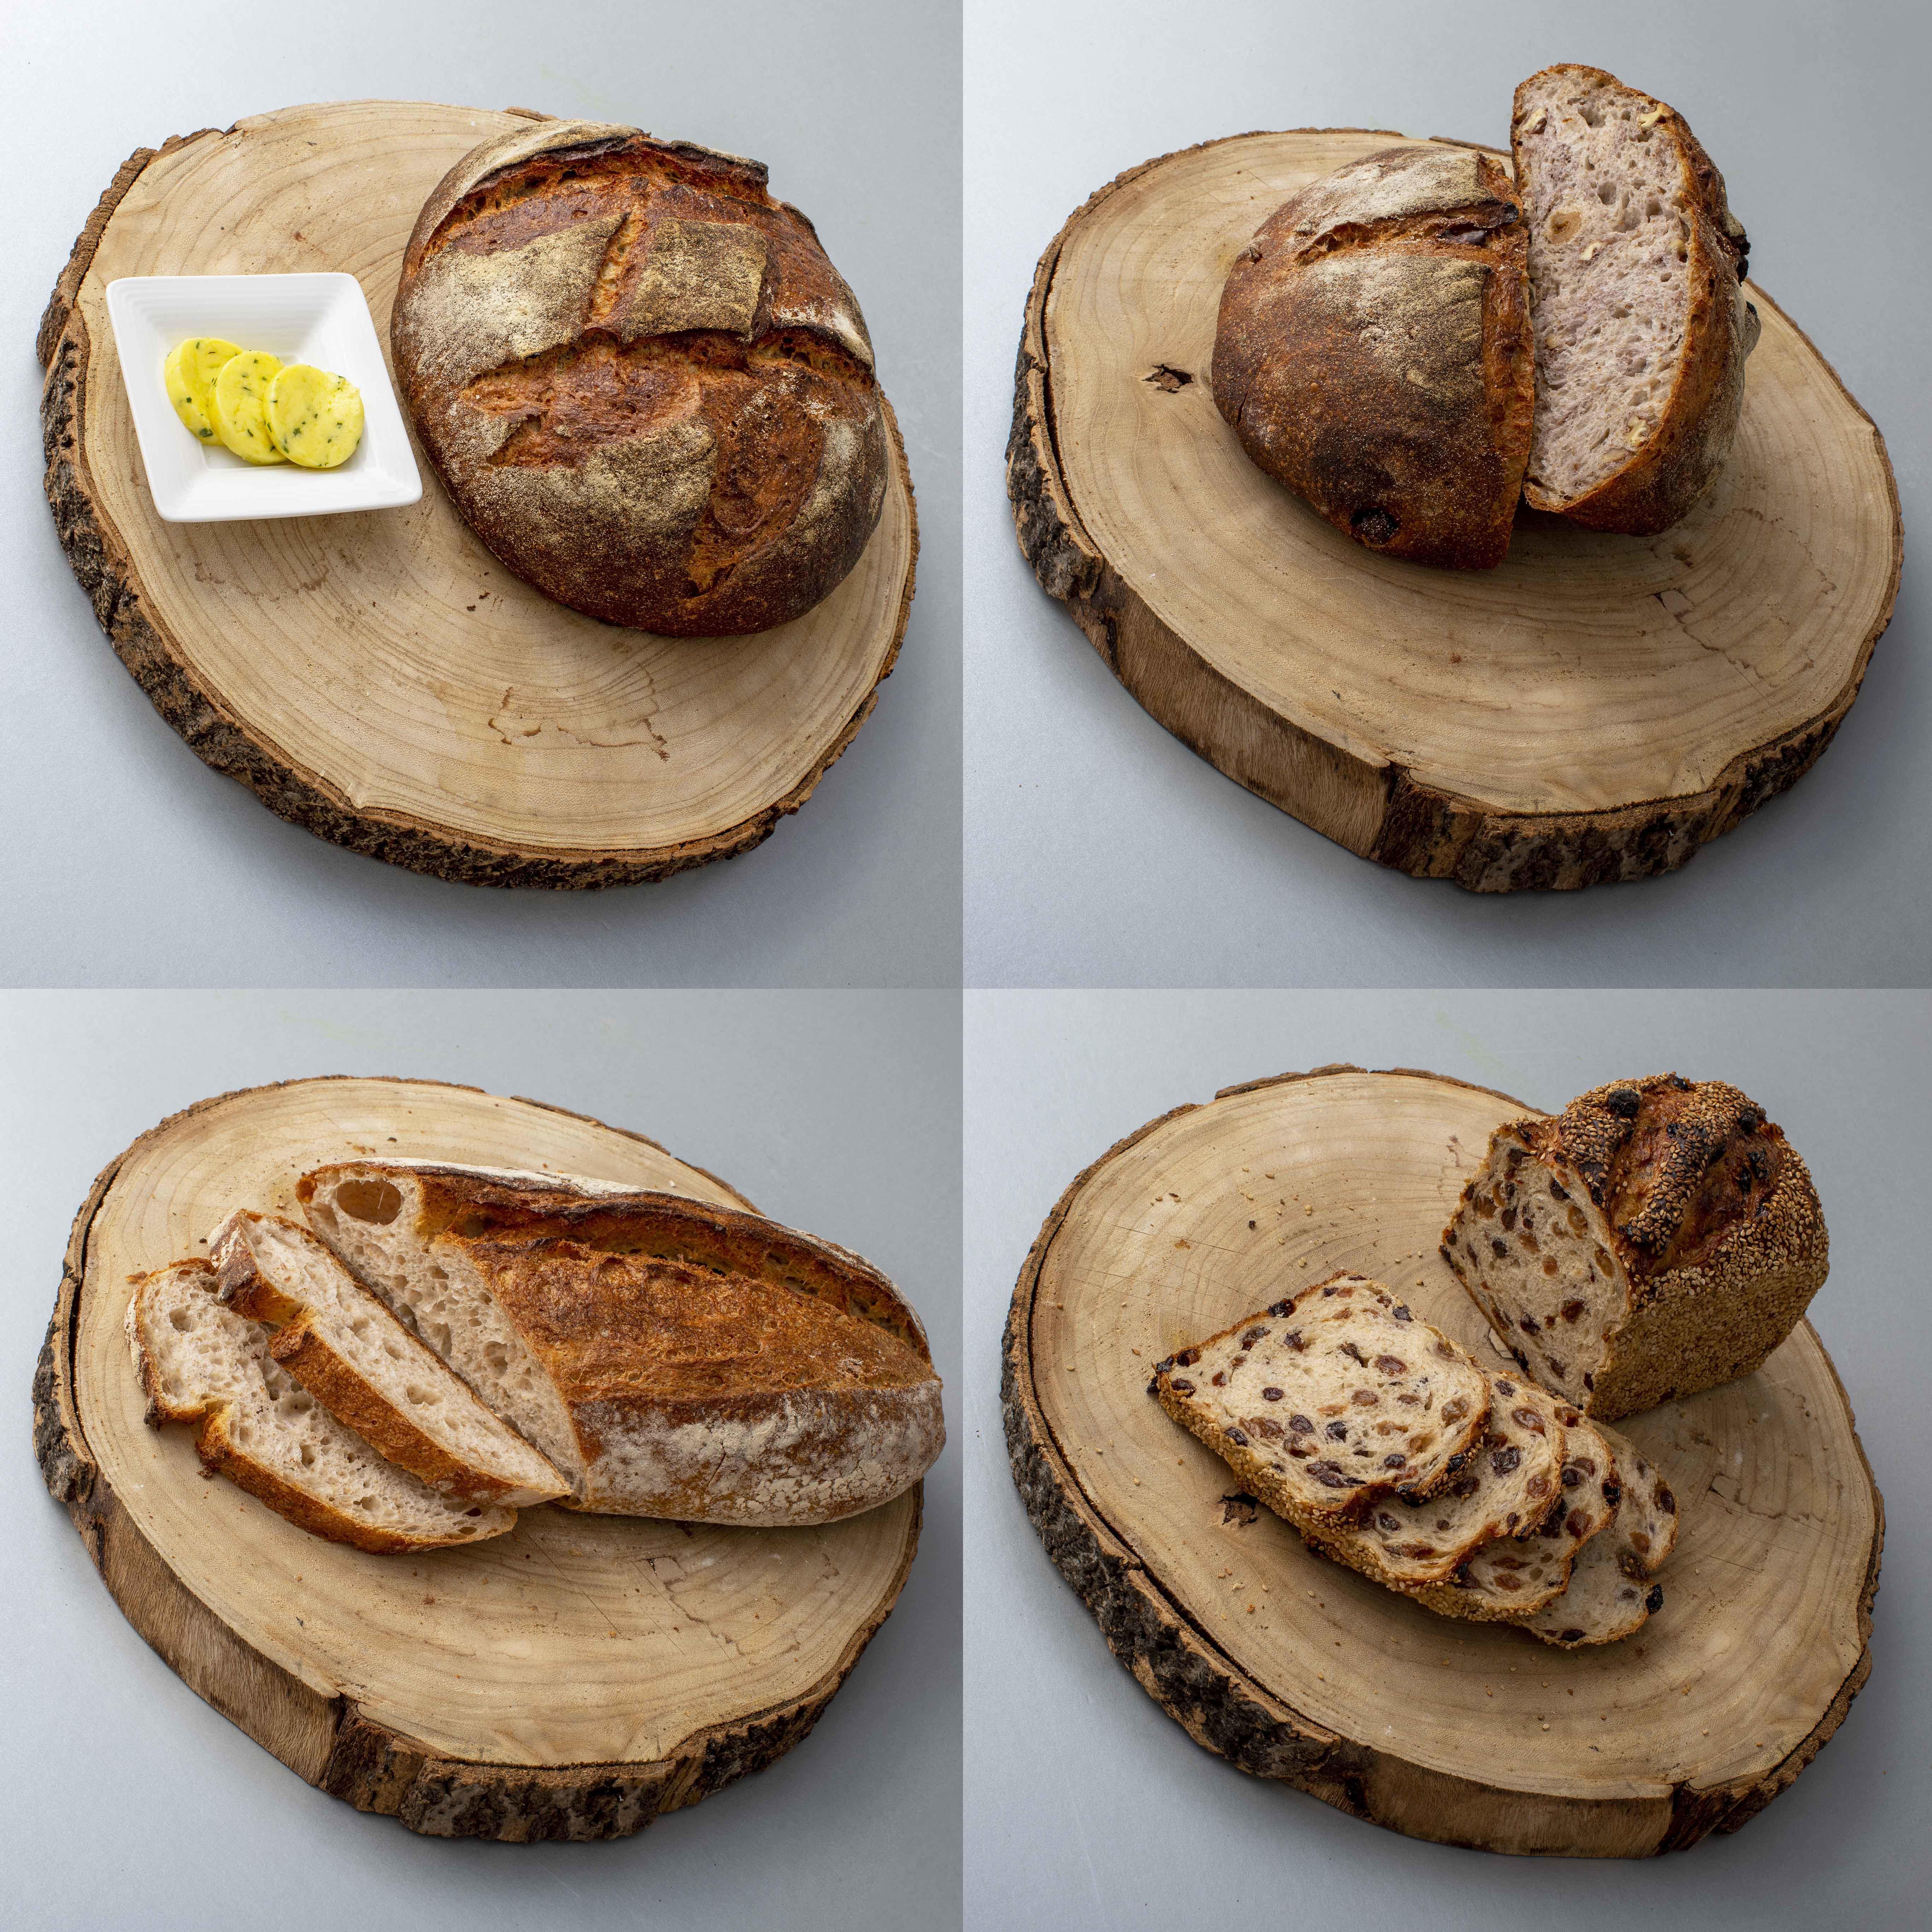 Selection of Artisan Breads